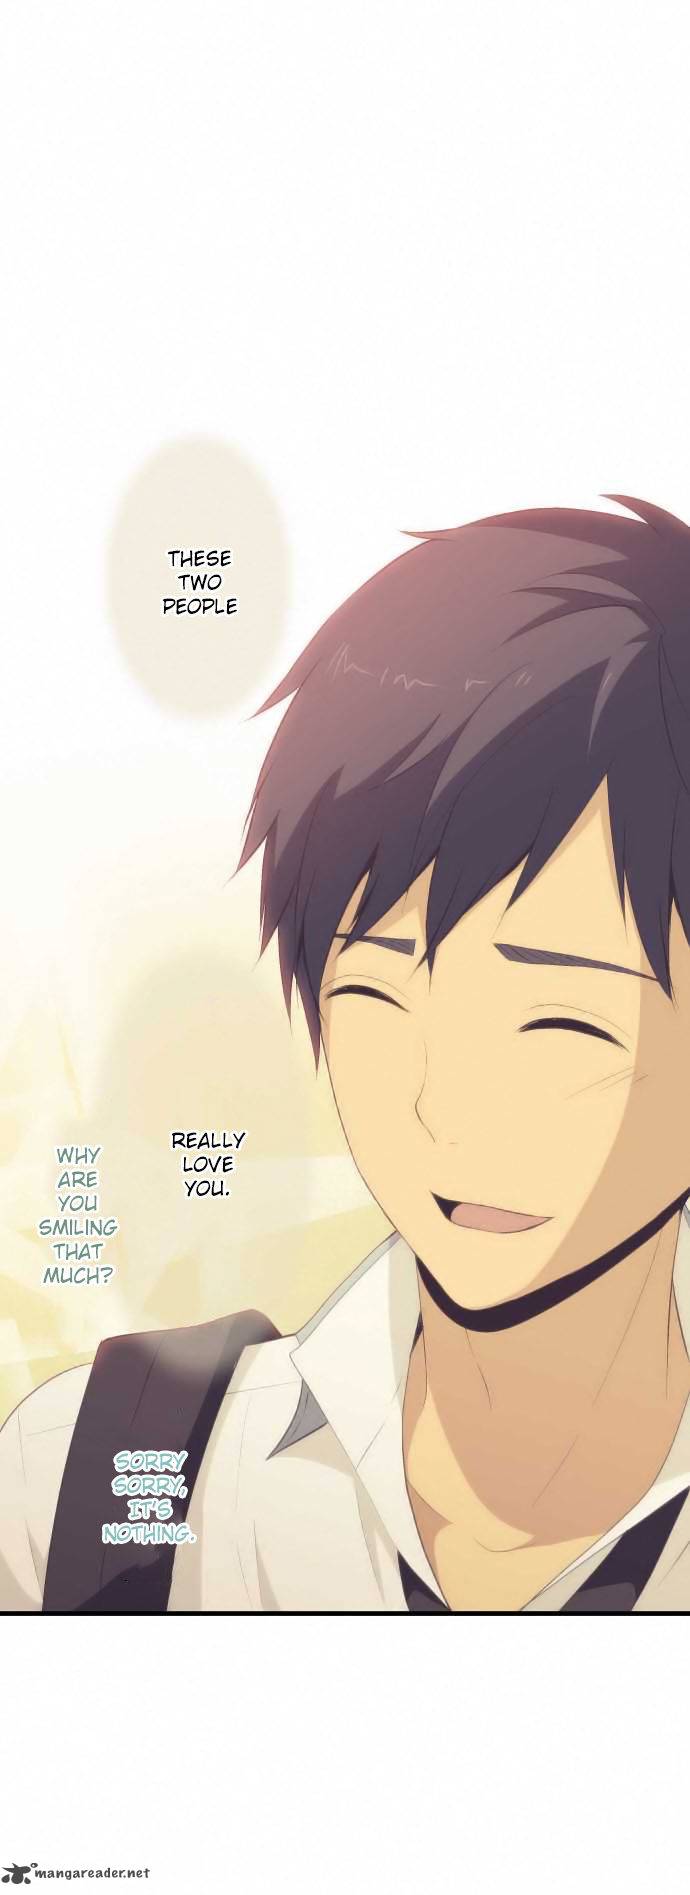 Relife 59 18